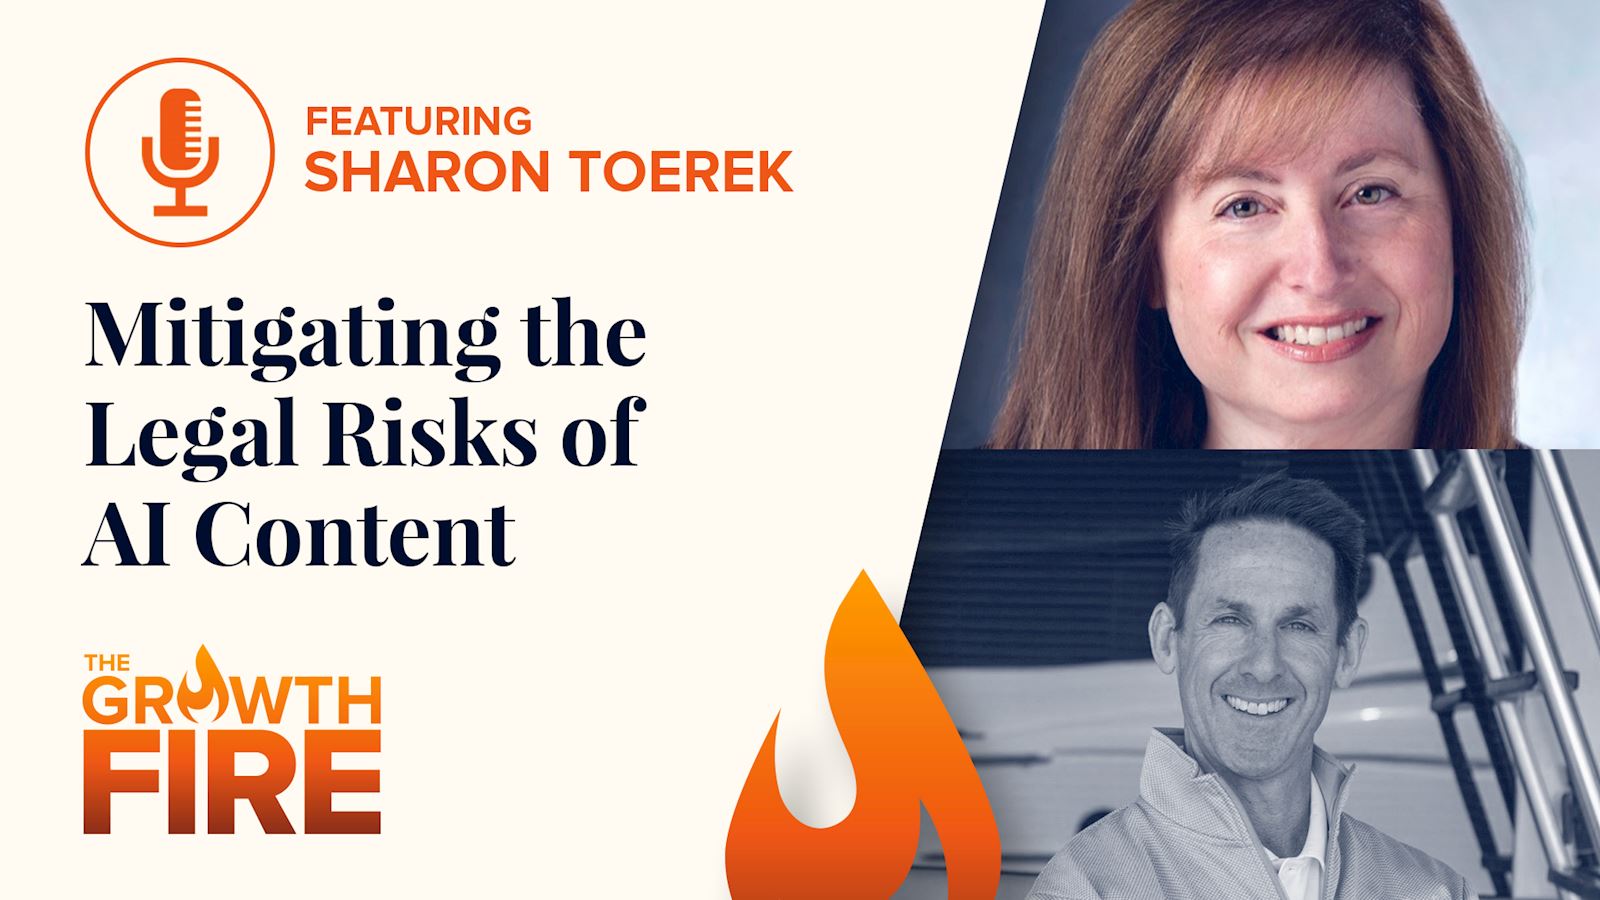 Mitigating the Legal Risks of AI Content With Sharon Toerek